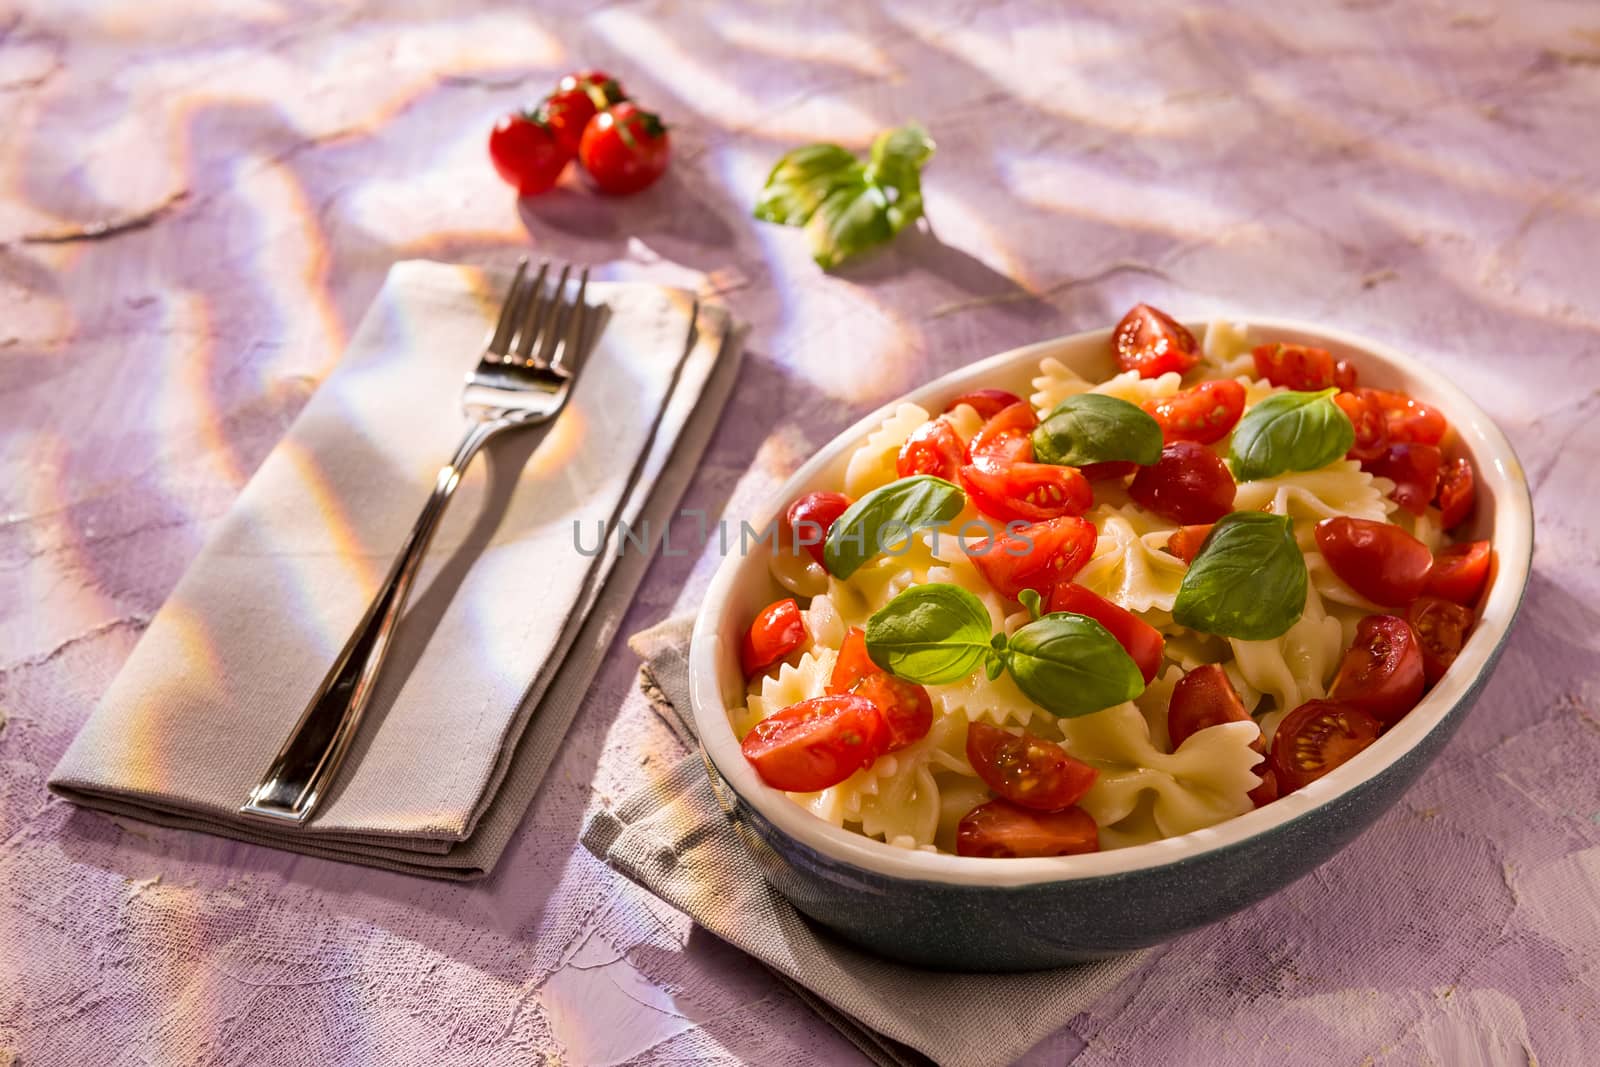 Italian Farfalle pasta with tomatoes and basil over a colored ba by LuigiMorbidelli